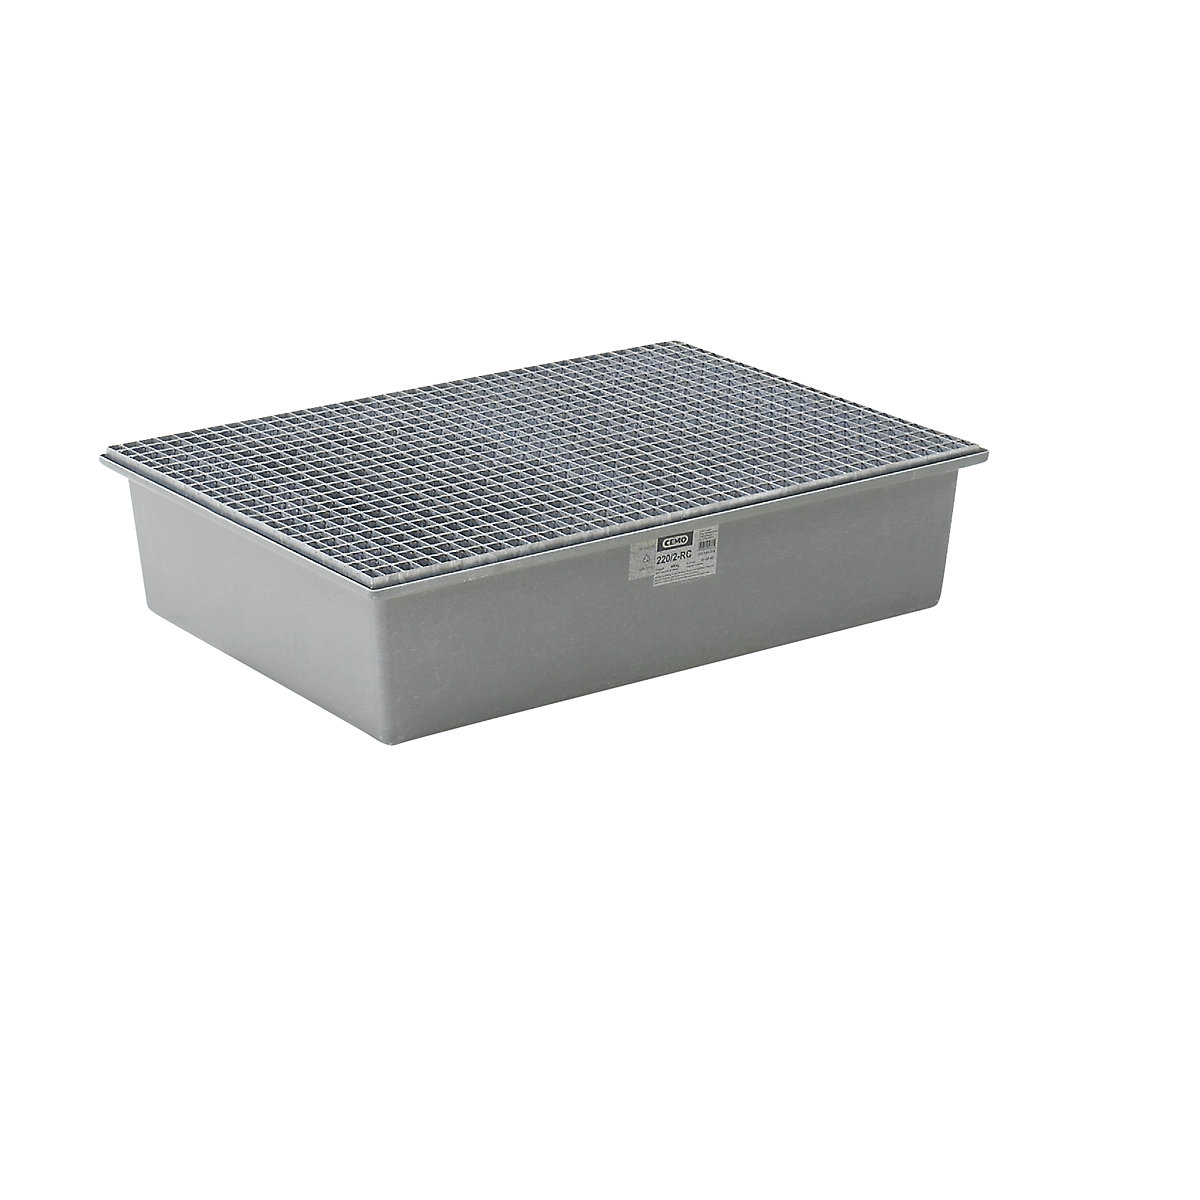 GRP base sump tray – CEMO, 2 x 200 litre drums, without certification, with steel grate-5